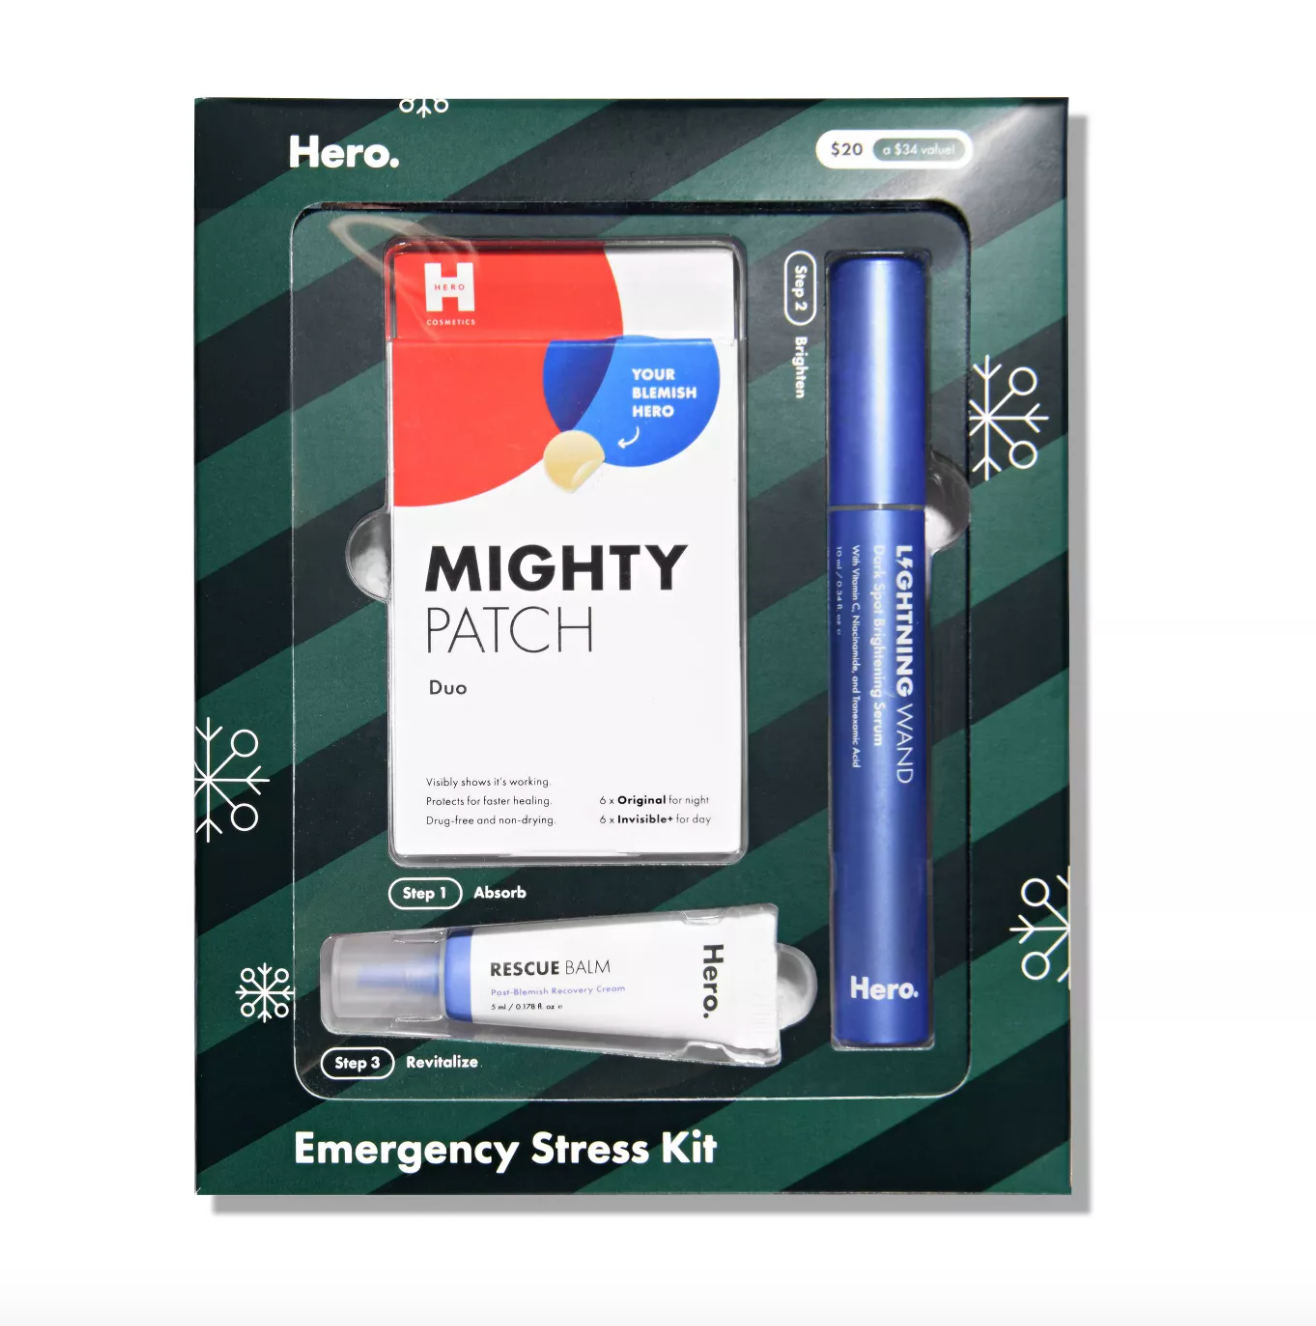 2 x Hero Cosmetics Mighty Patch - Your Blemish Hero 6 Invisible Day 6 Night